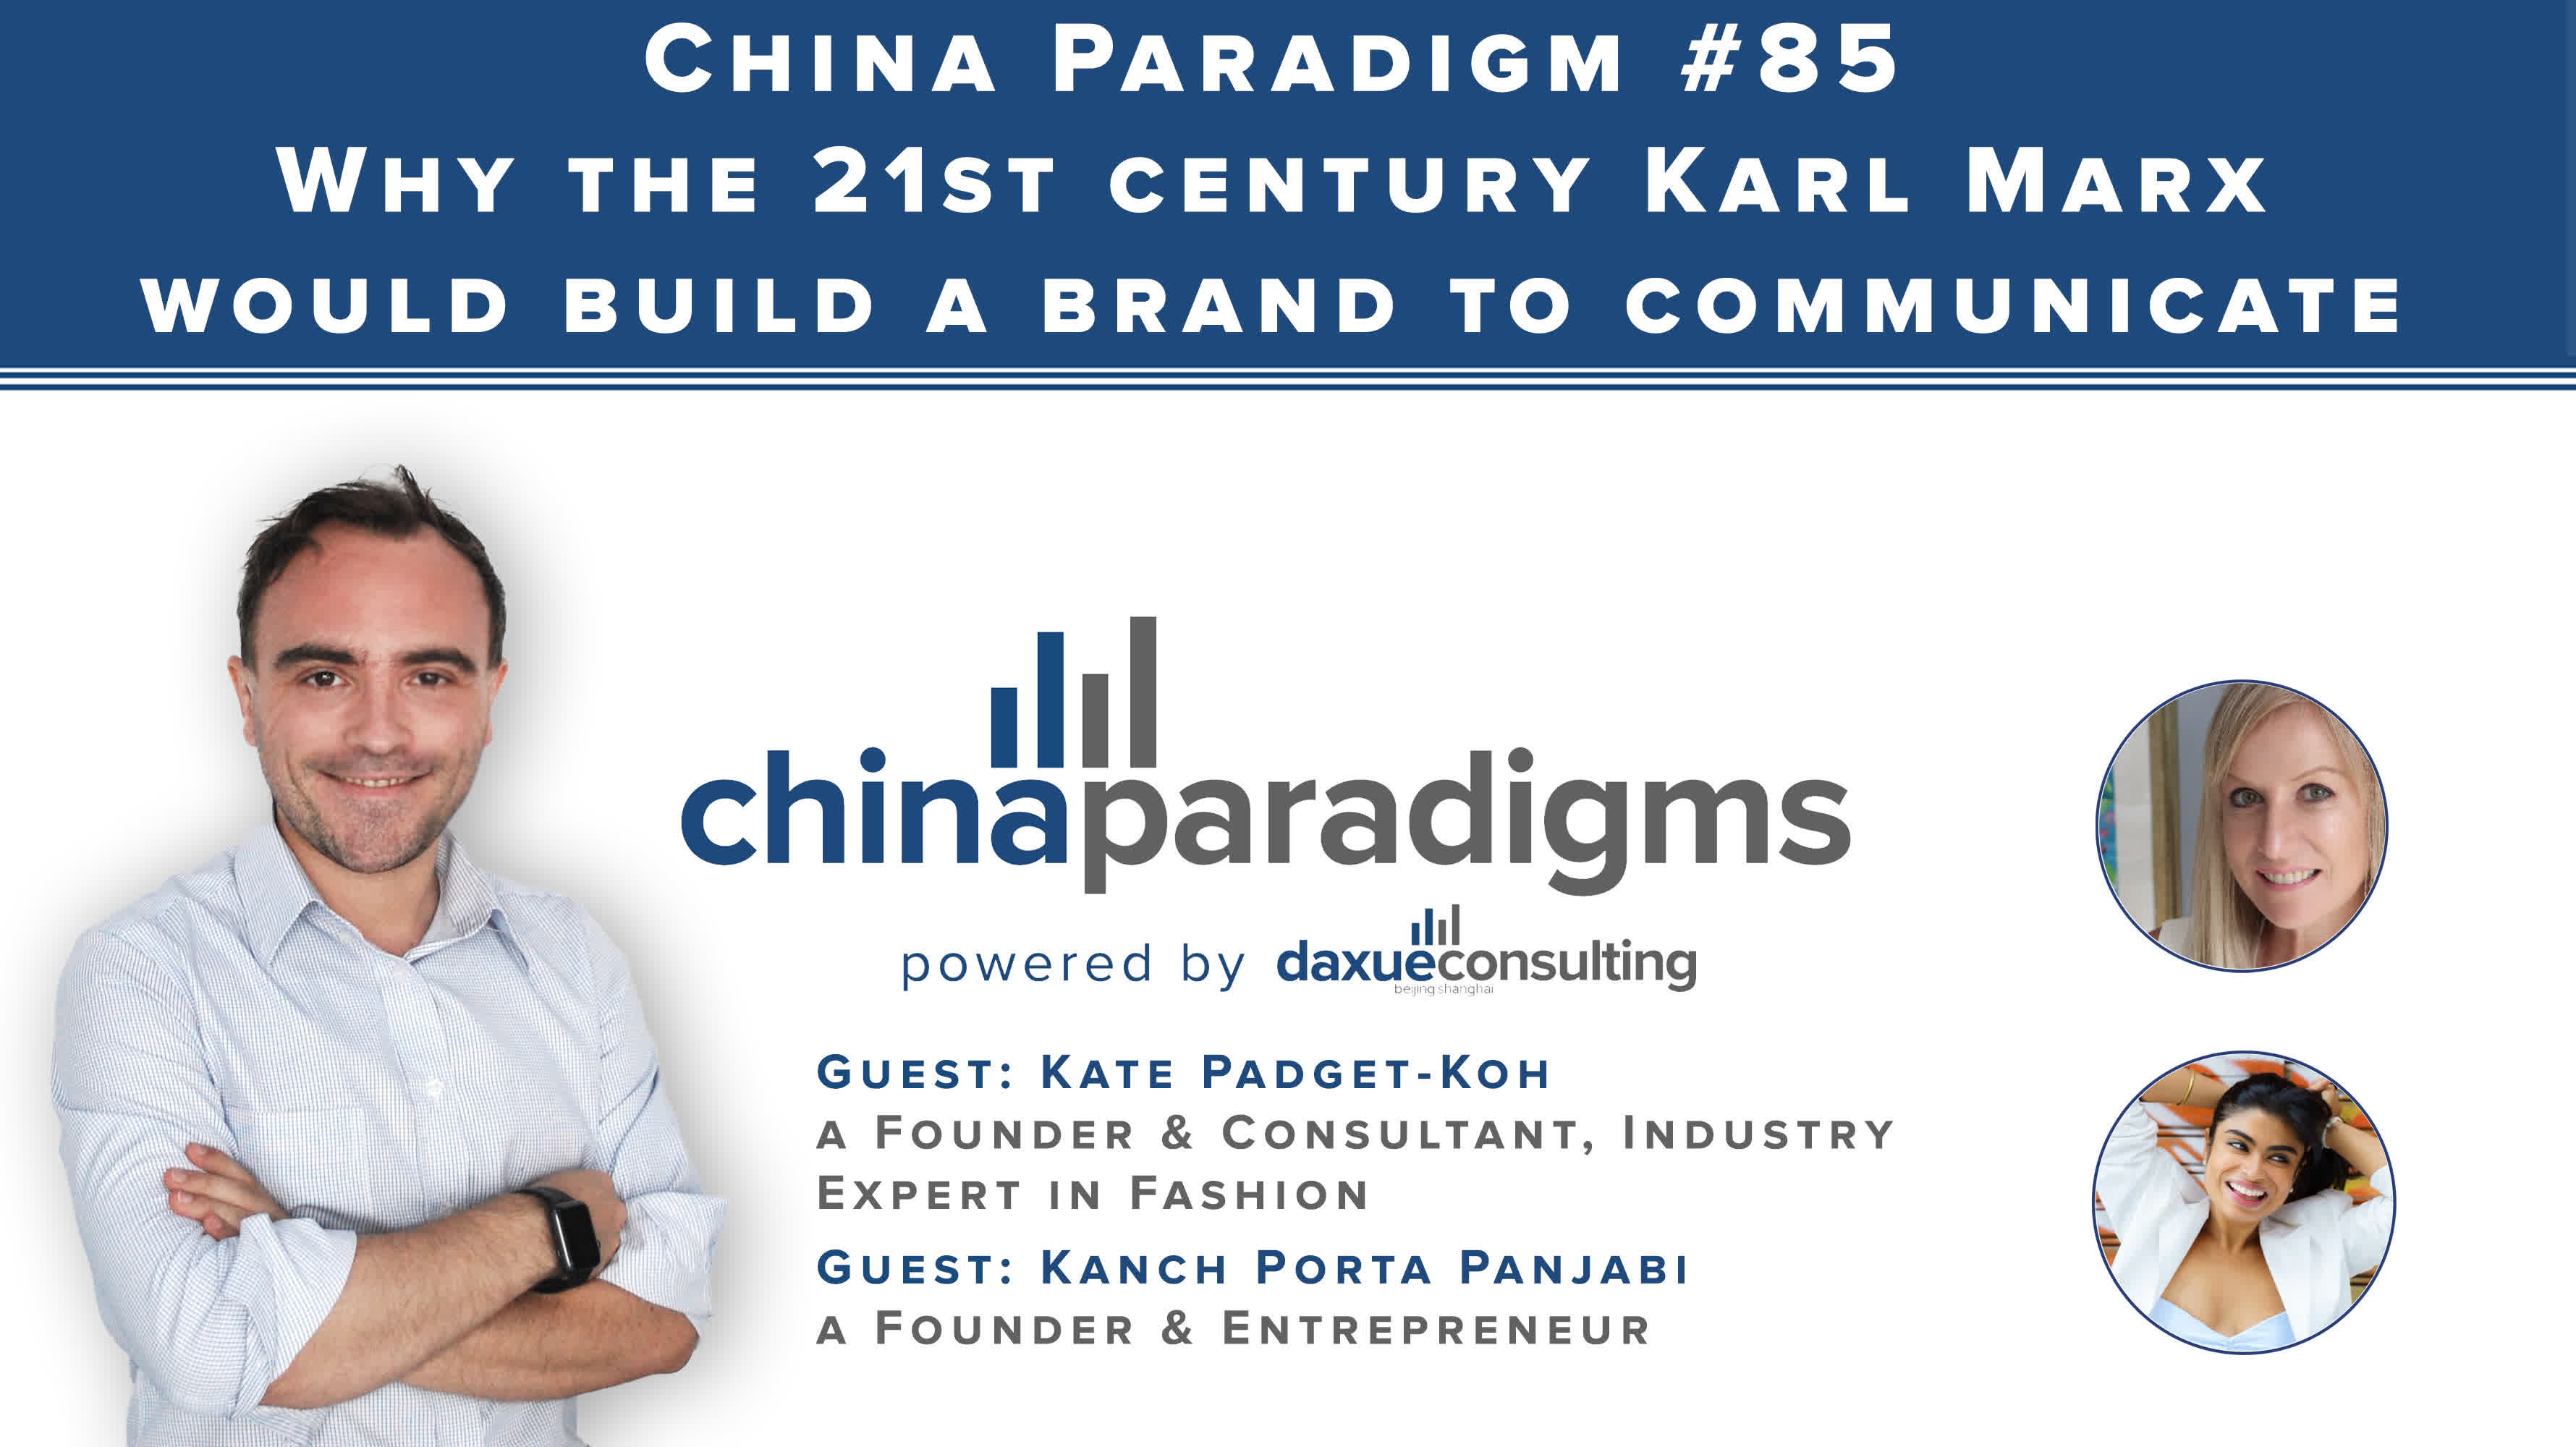 China Paradigm 85: Why the 21st century Karl Marx would build a brand to communicate ideology